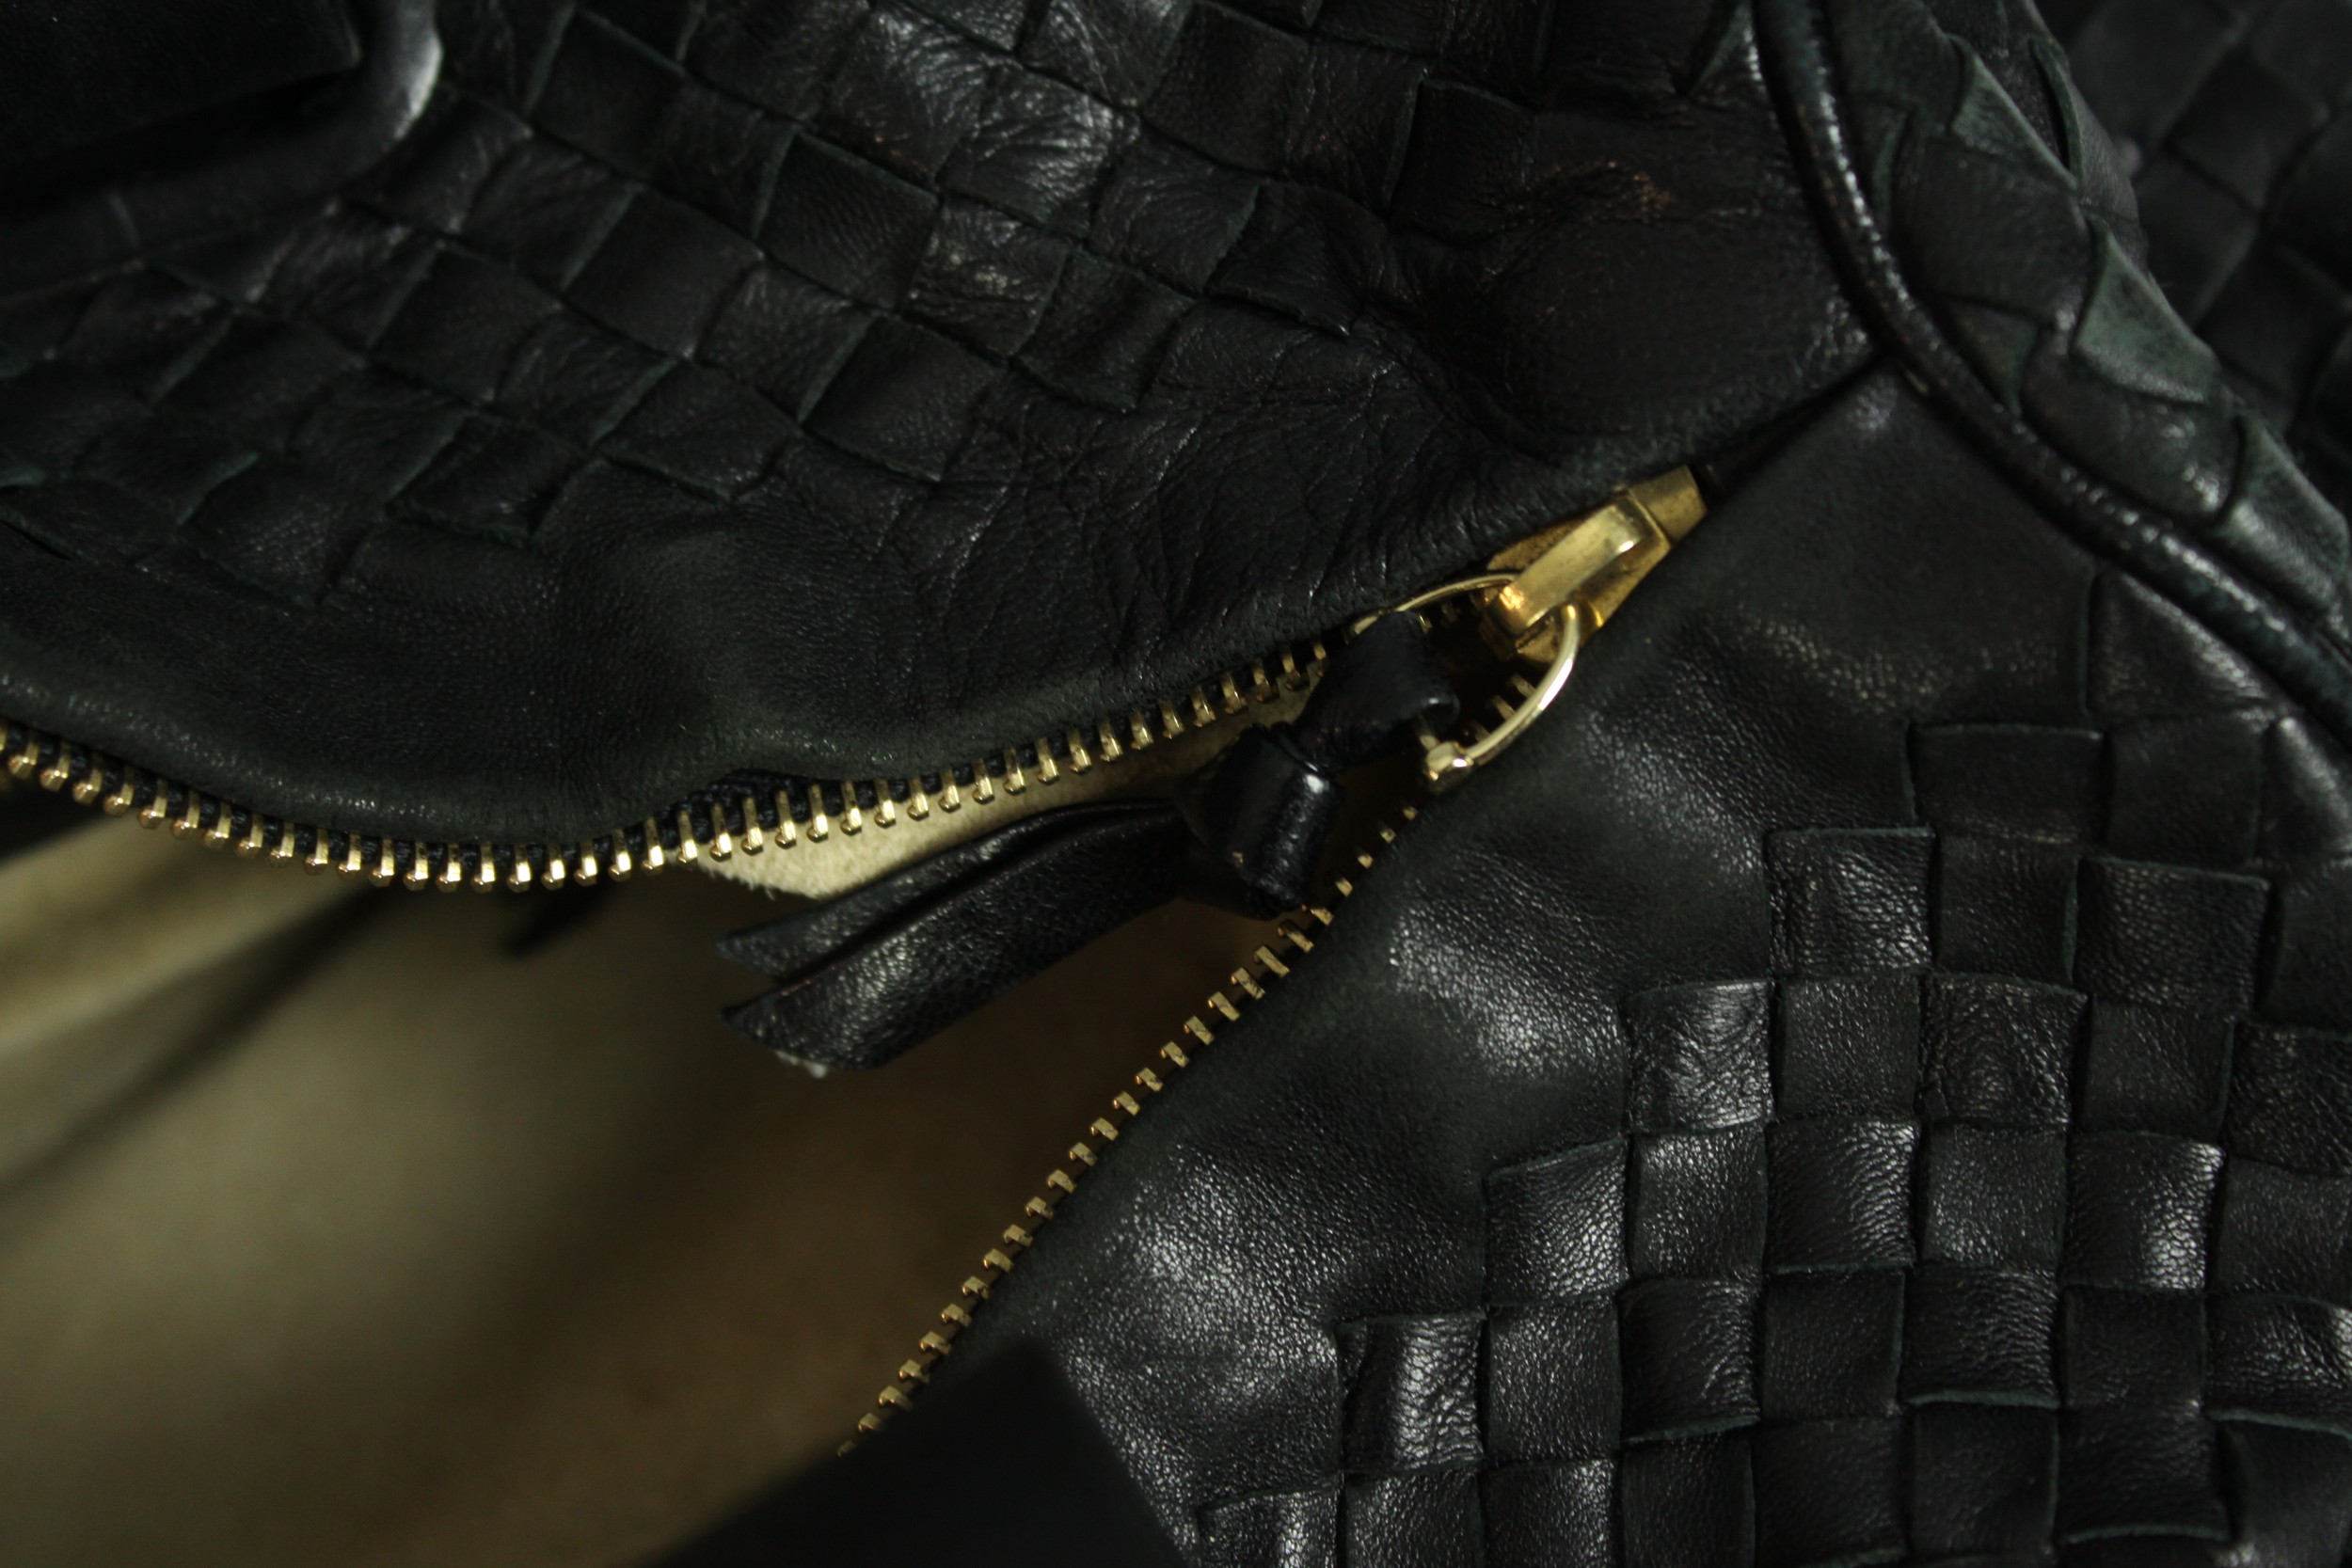 A large Bottega Veneta Intrecciato black leather weekend bag. With a suede lining and calf leather - Image 5 of 6